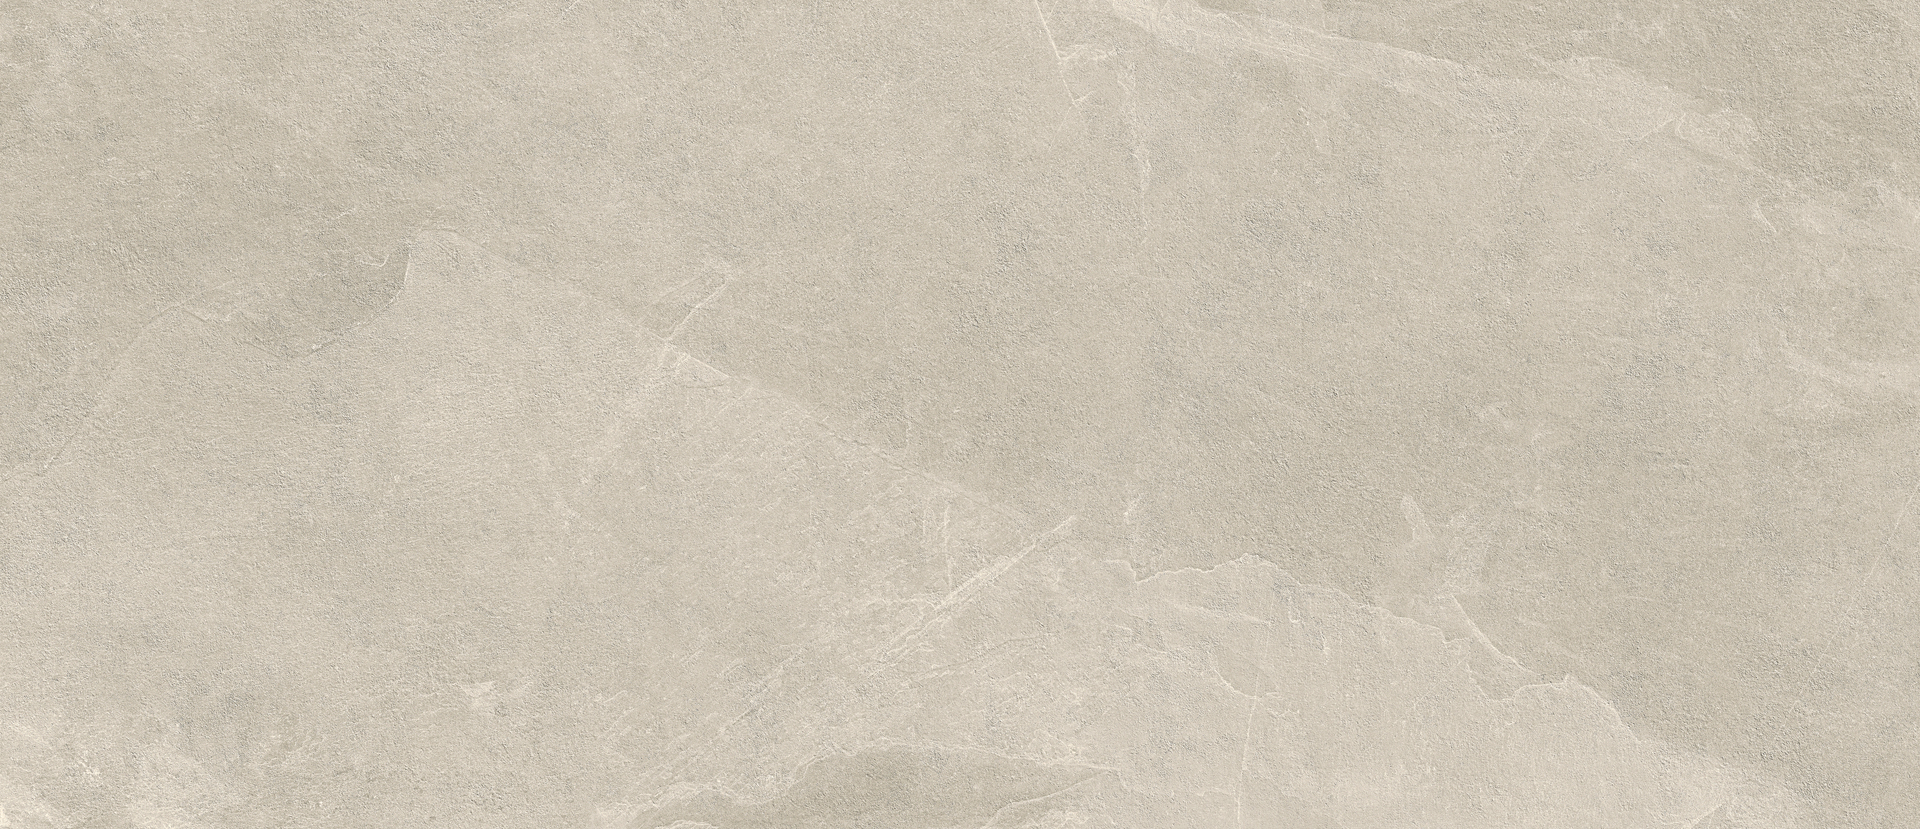 Panaria Zero.3 Stone Trace Glade Antibacterial - Naturale PZ6ST30 120x278cm rectified 6mm